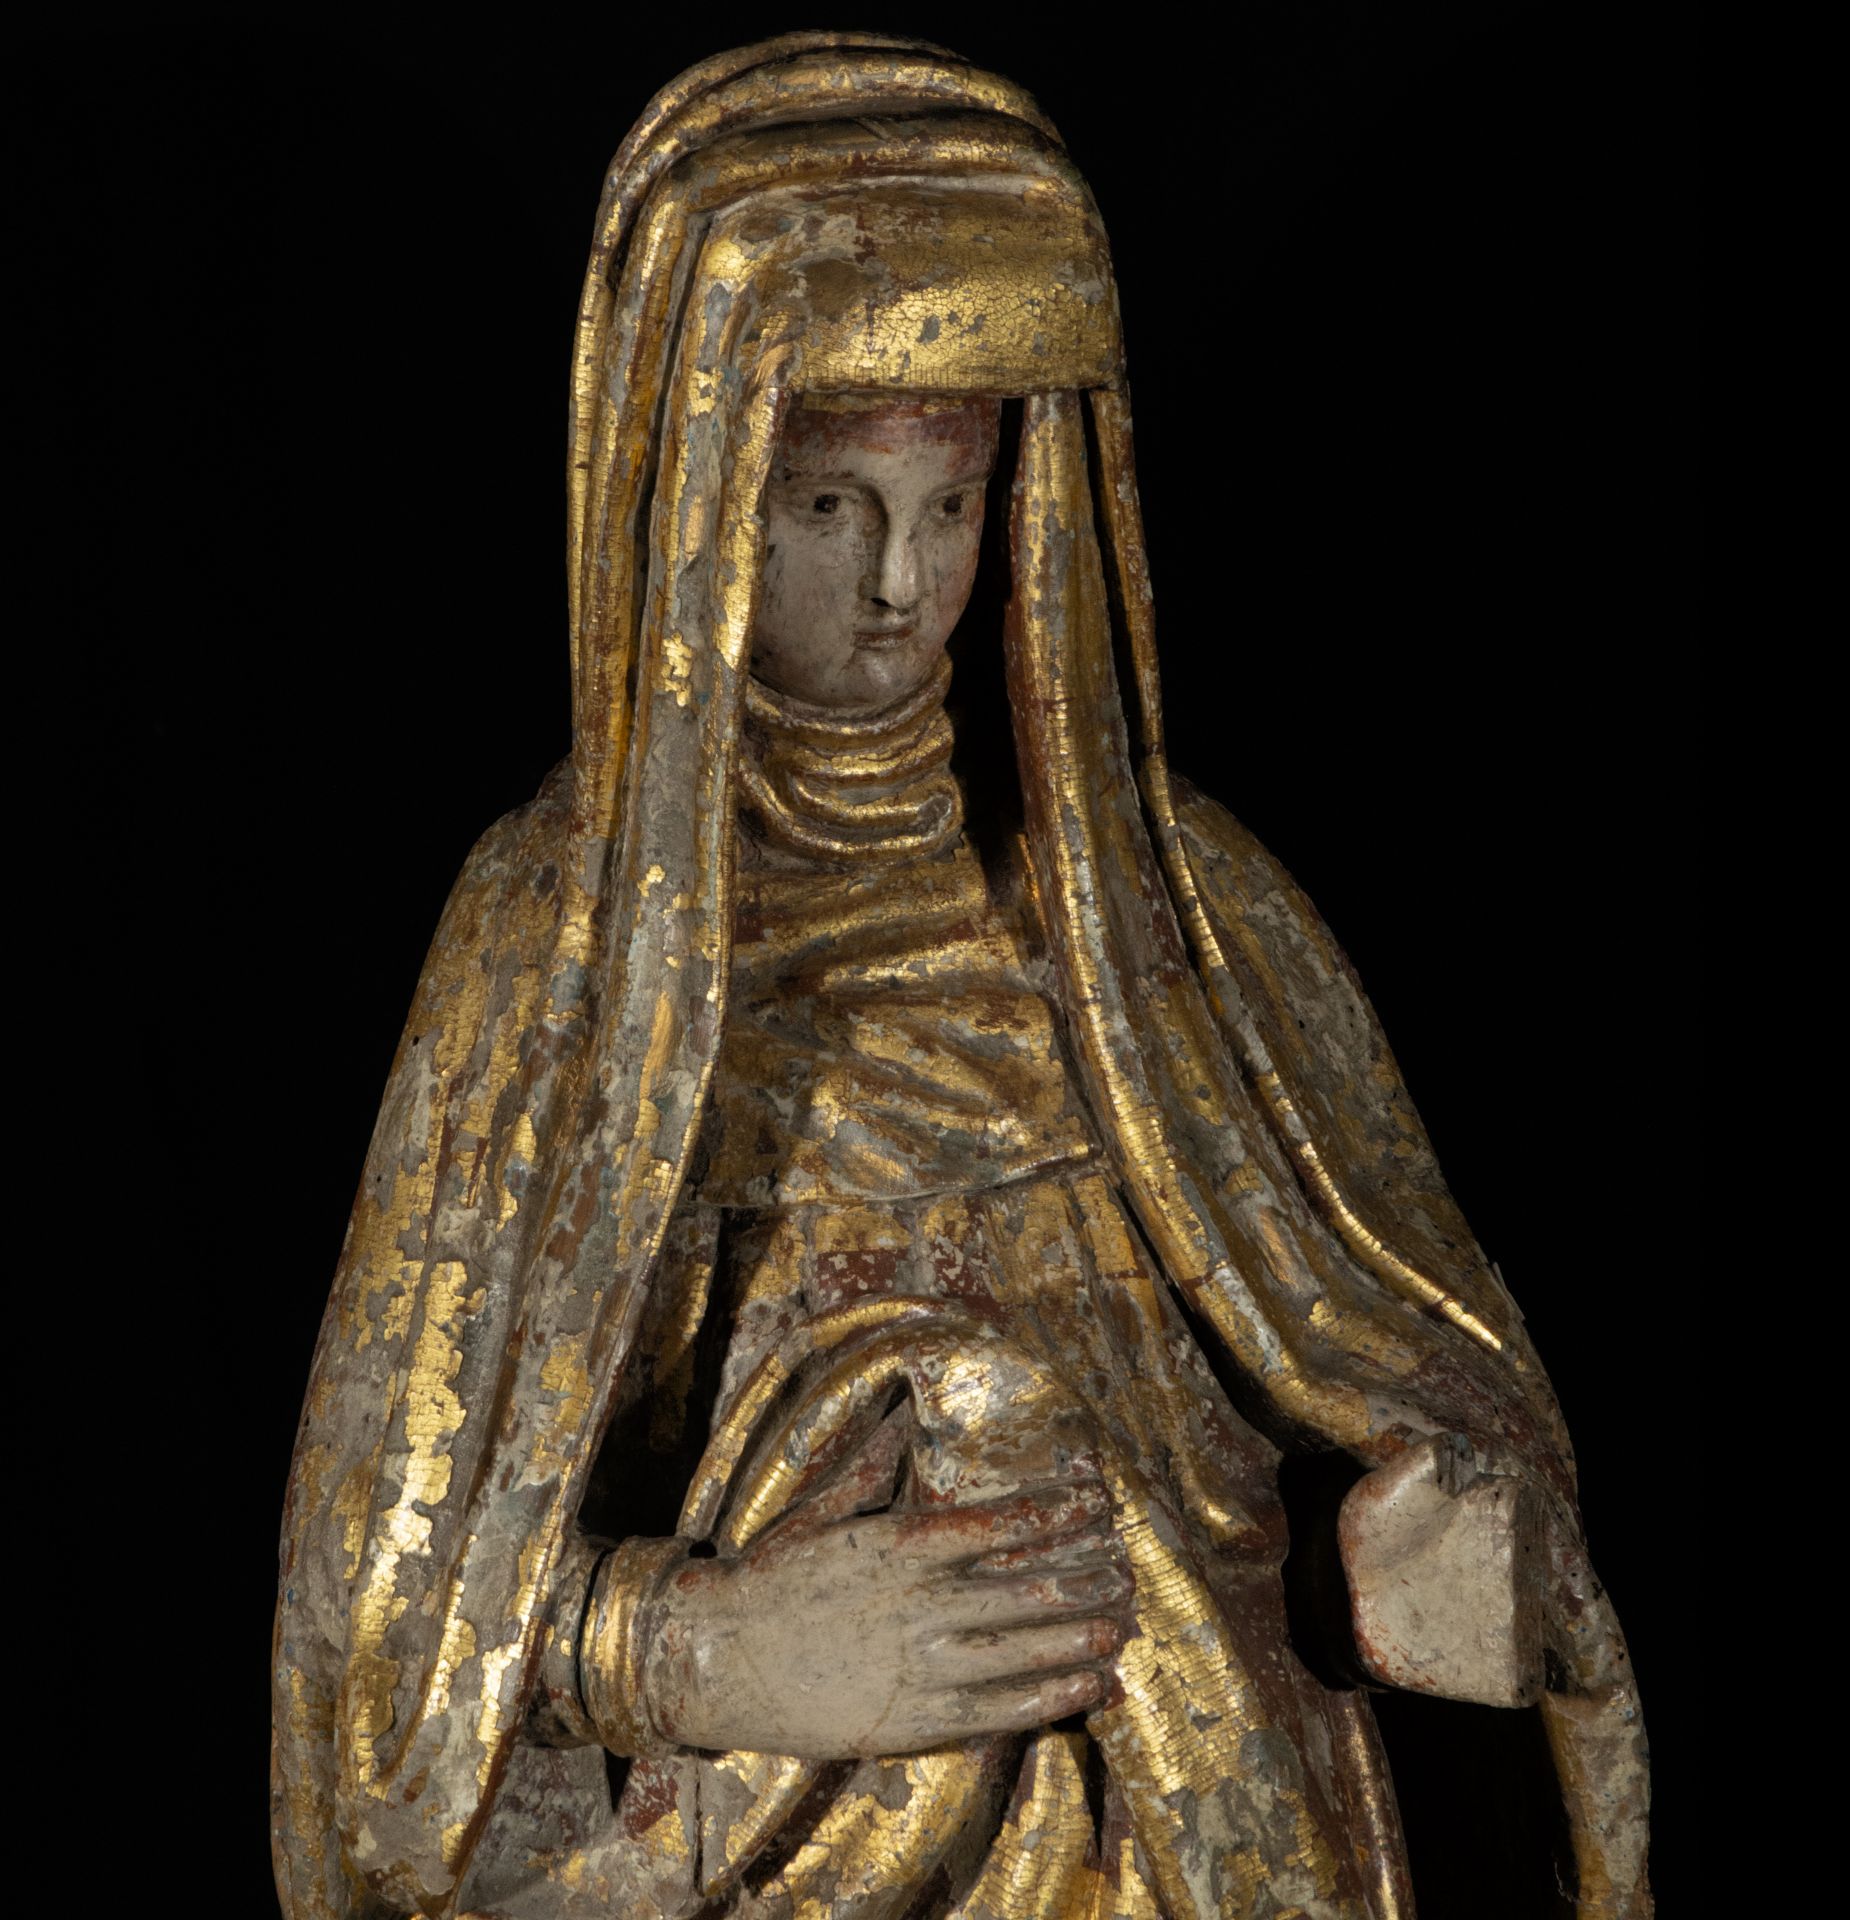 Brabant school of the 15th century - early 16th century, Great Virgin Sorrowful - Image 2 of 8